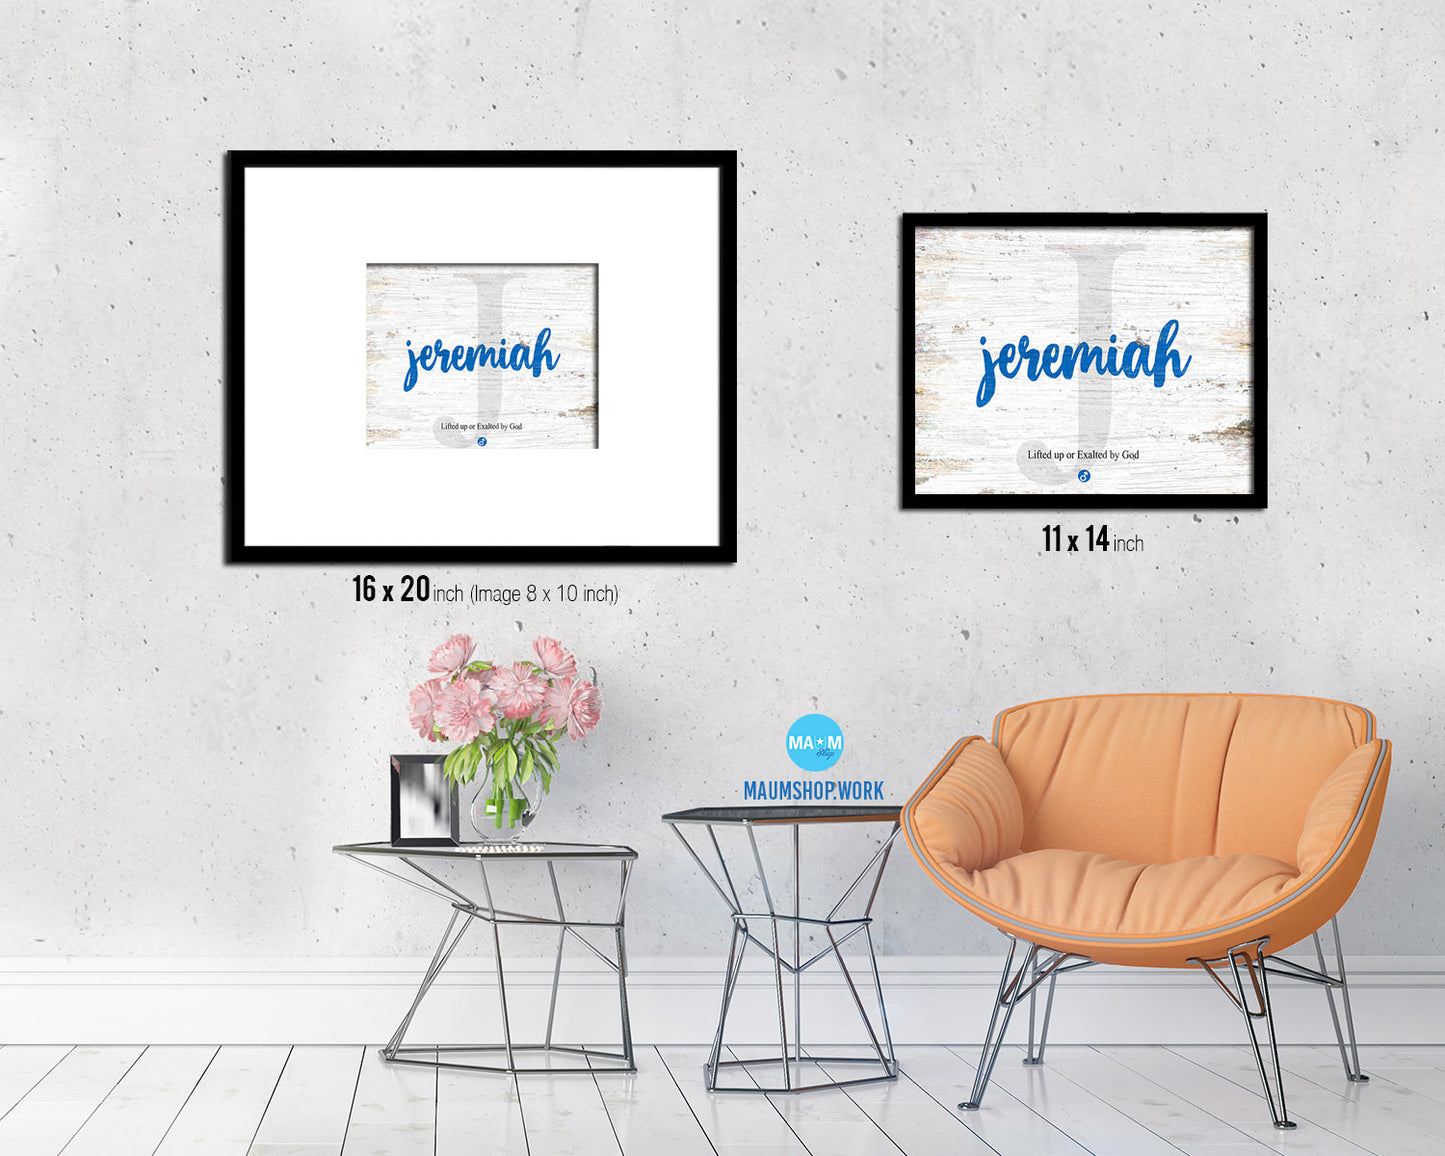 Jeremiah Personalized Biblical Name Plate Art Framed Print Kids Baby Room Wall Decor Gifts